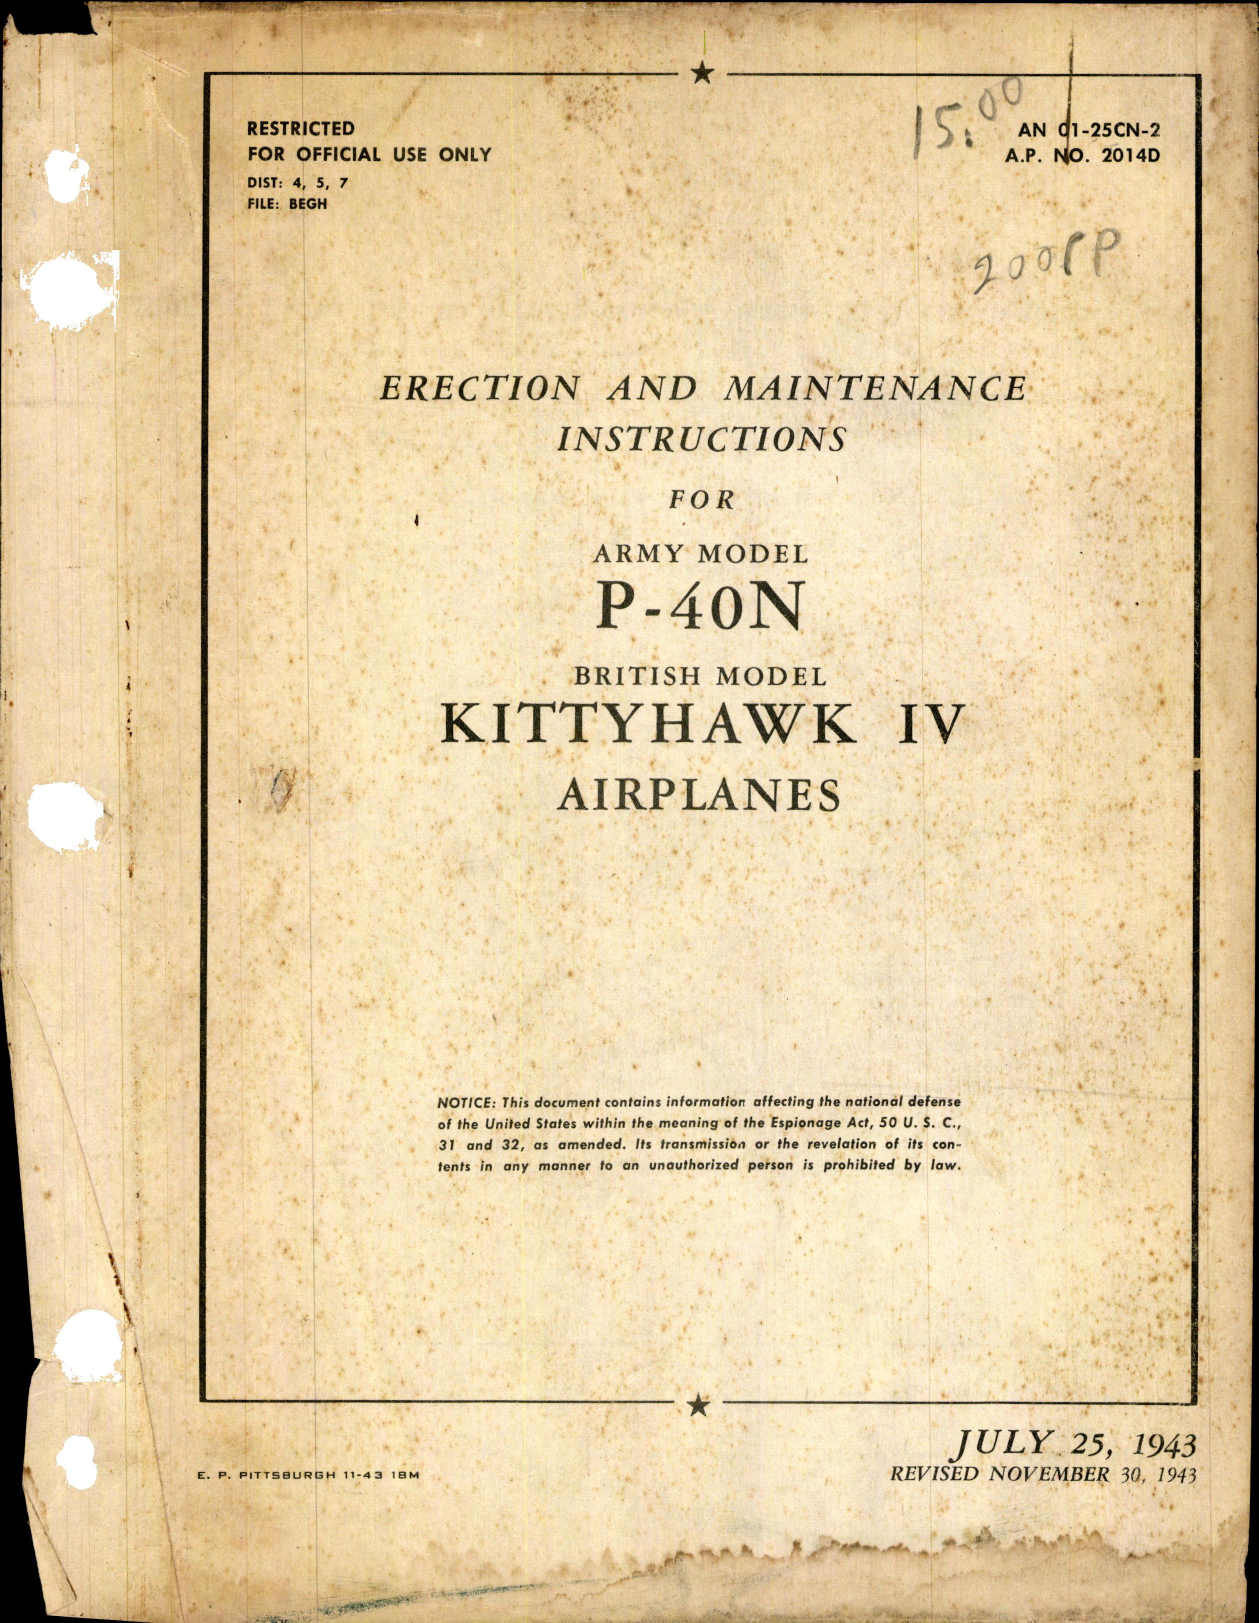 Sample page 1 from AirCorps Library document: Erection and Maintenance Instructions for P-40N and Kittyhawk IV